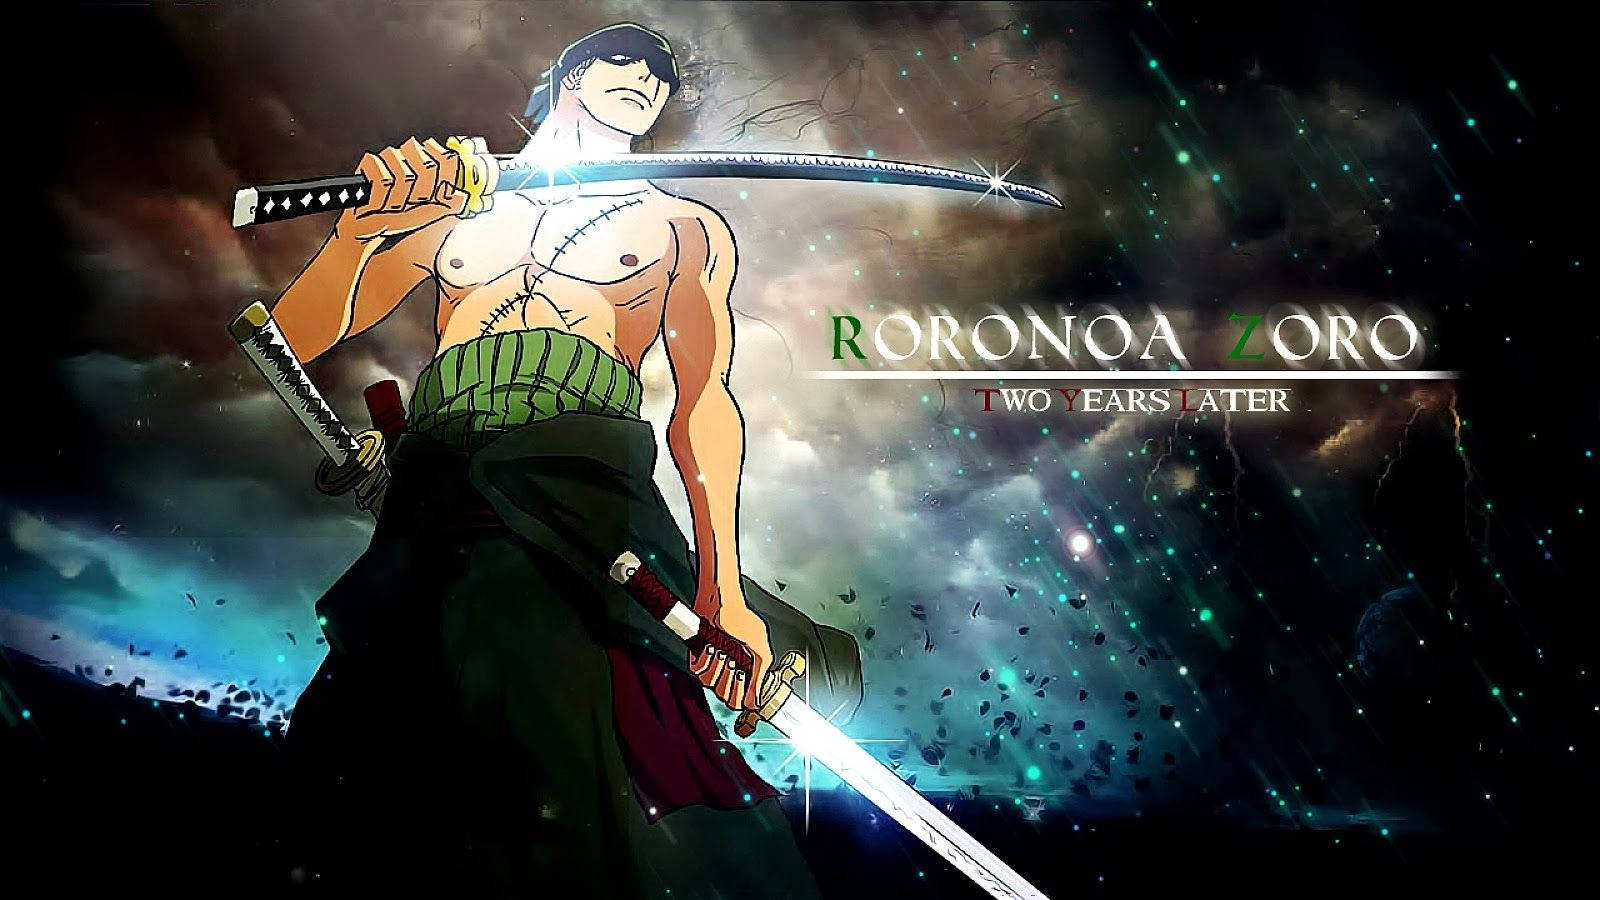 "Unlock the mysteries of the night sky with Zoro" Wallpaper